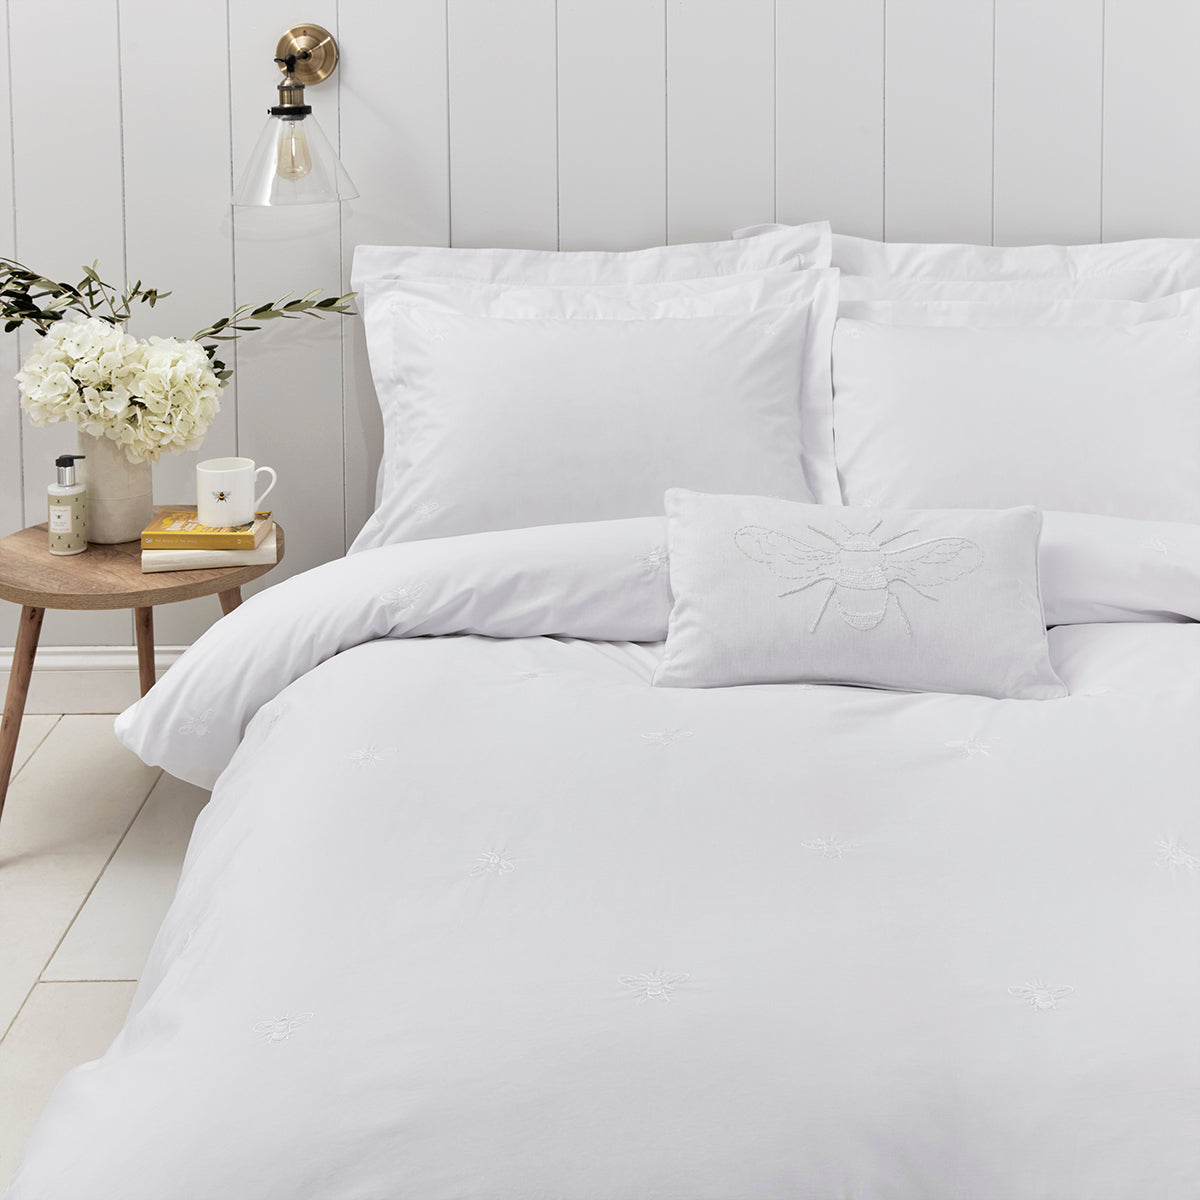 Bees Embroidered Bedding Set by Sophie Allport